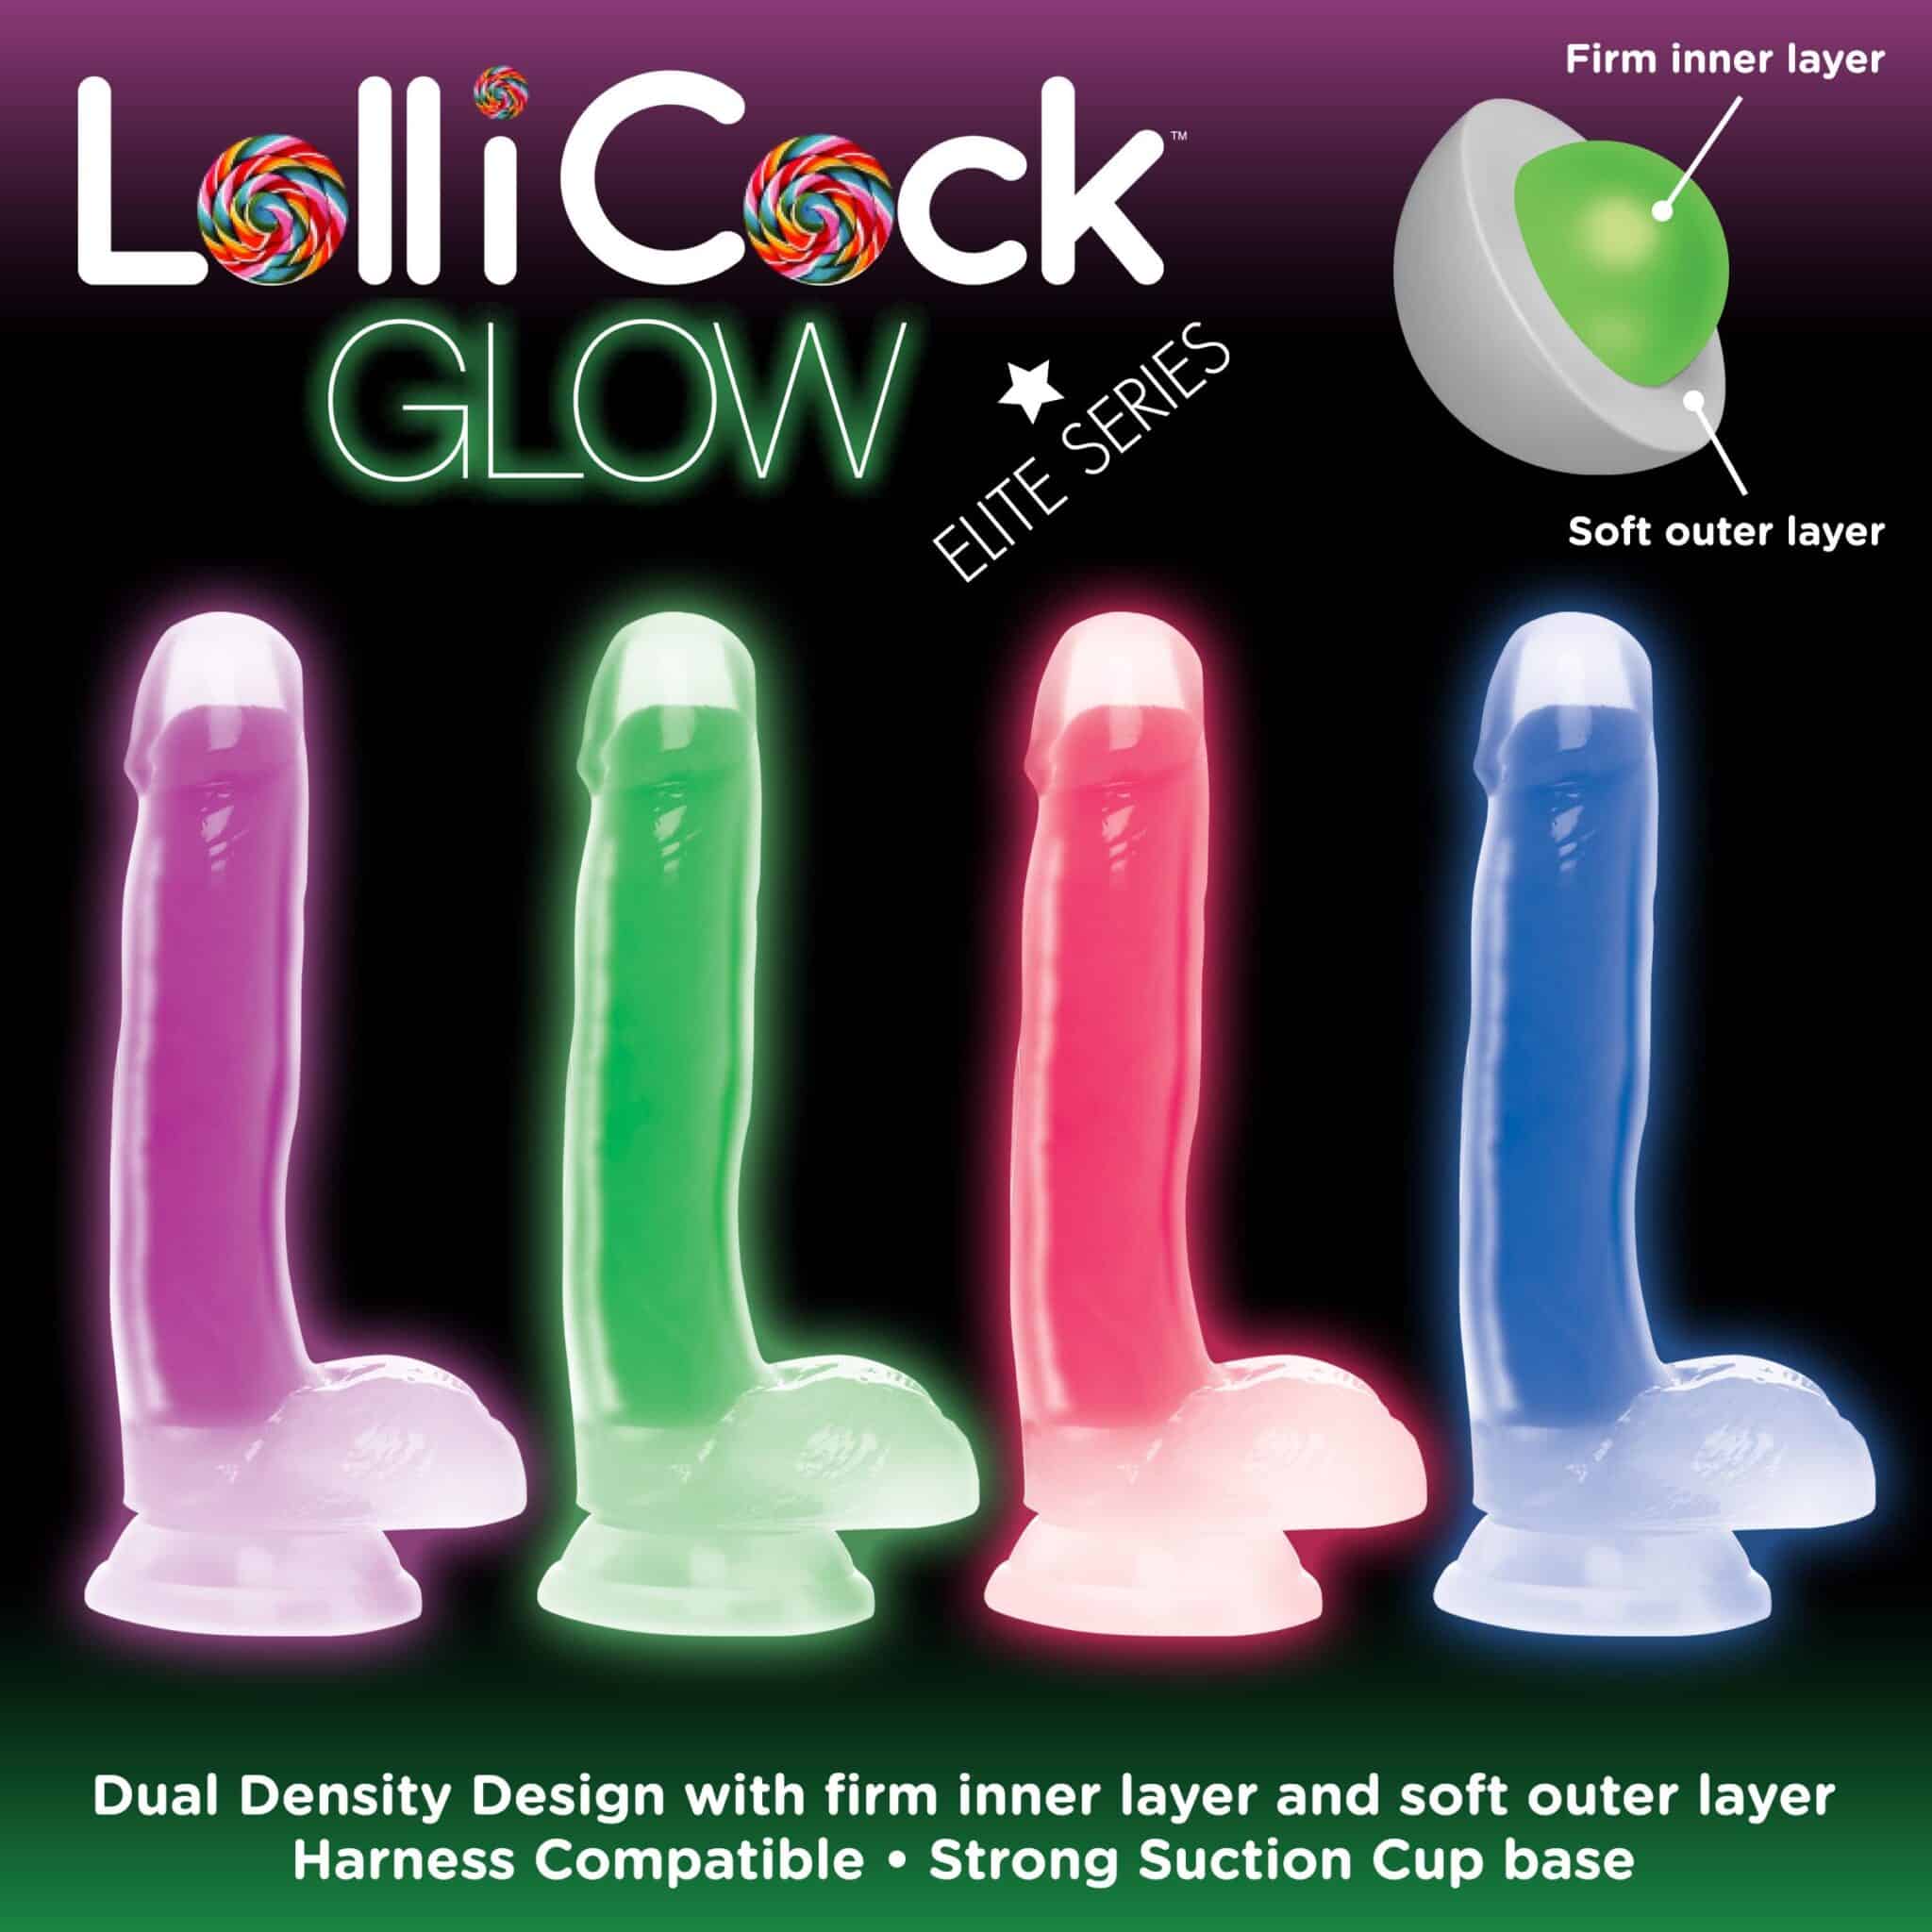 7 Inch Glow-in-the-Dark Silicone Dildo with Balls – Green